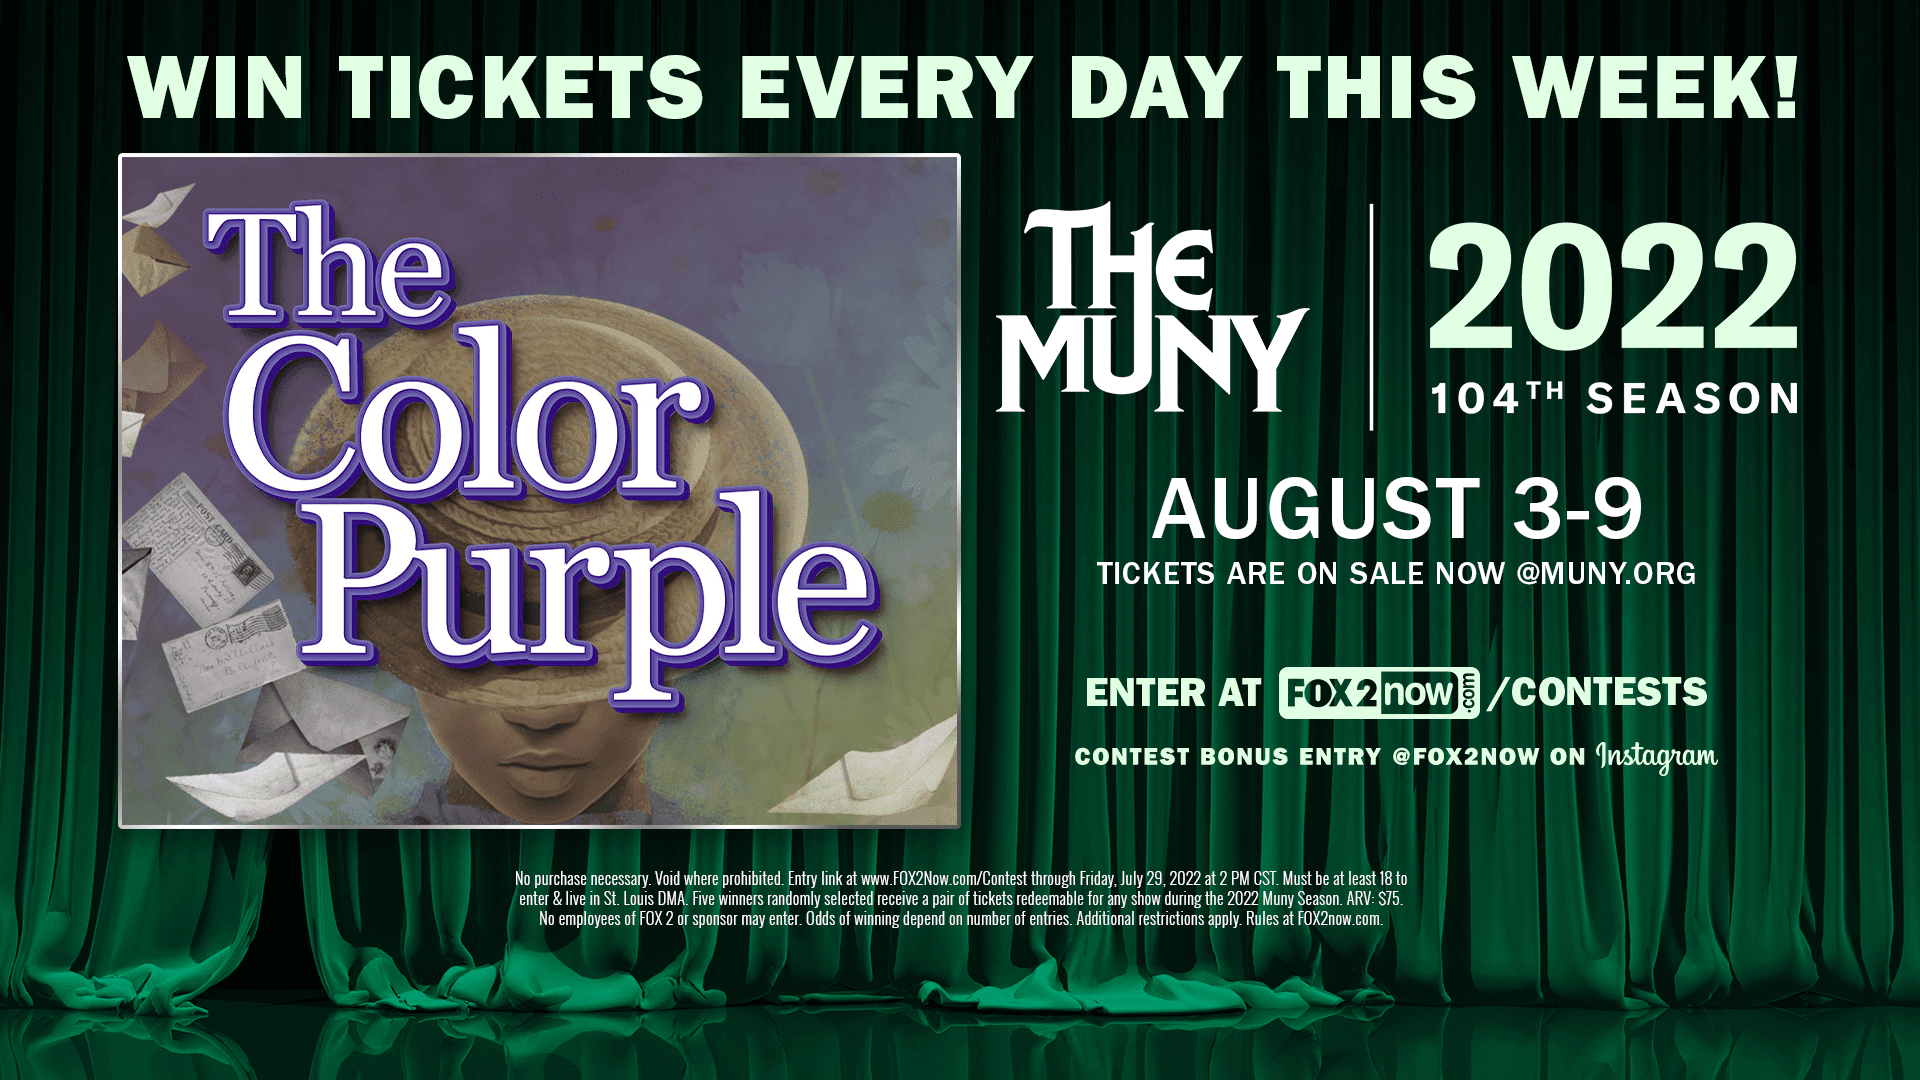 The Color Purple makes its Muny Debut Win tickets!